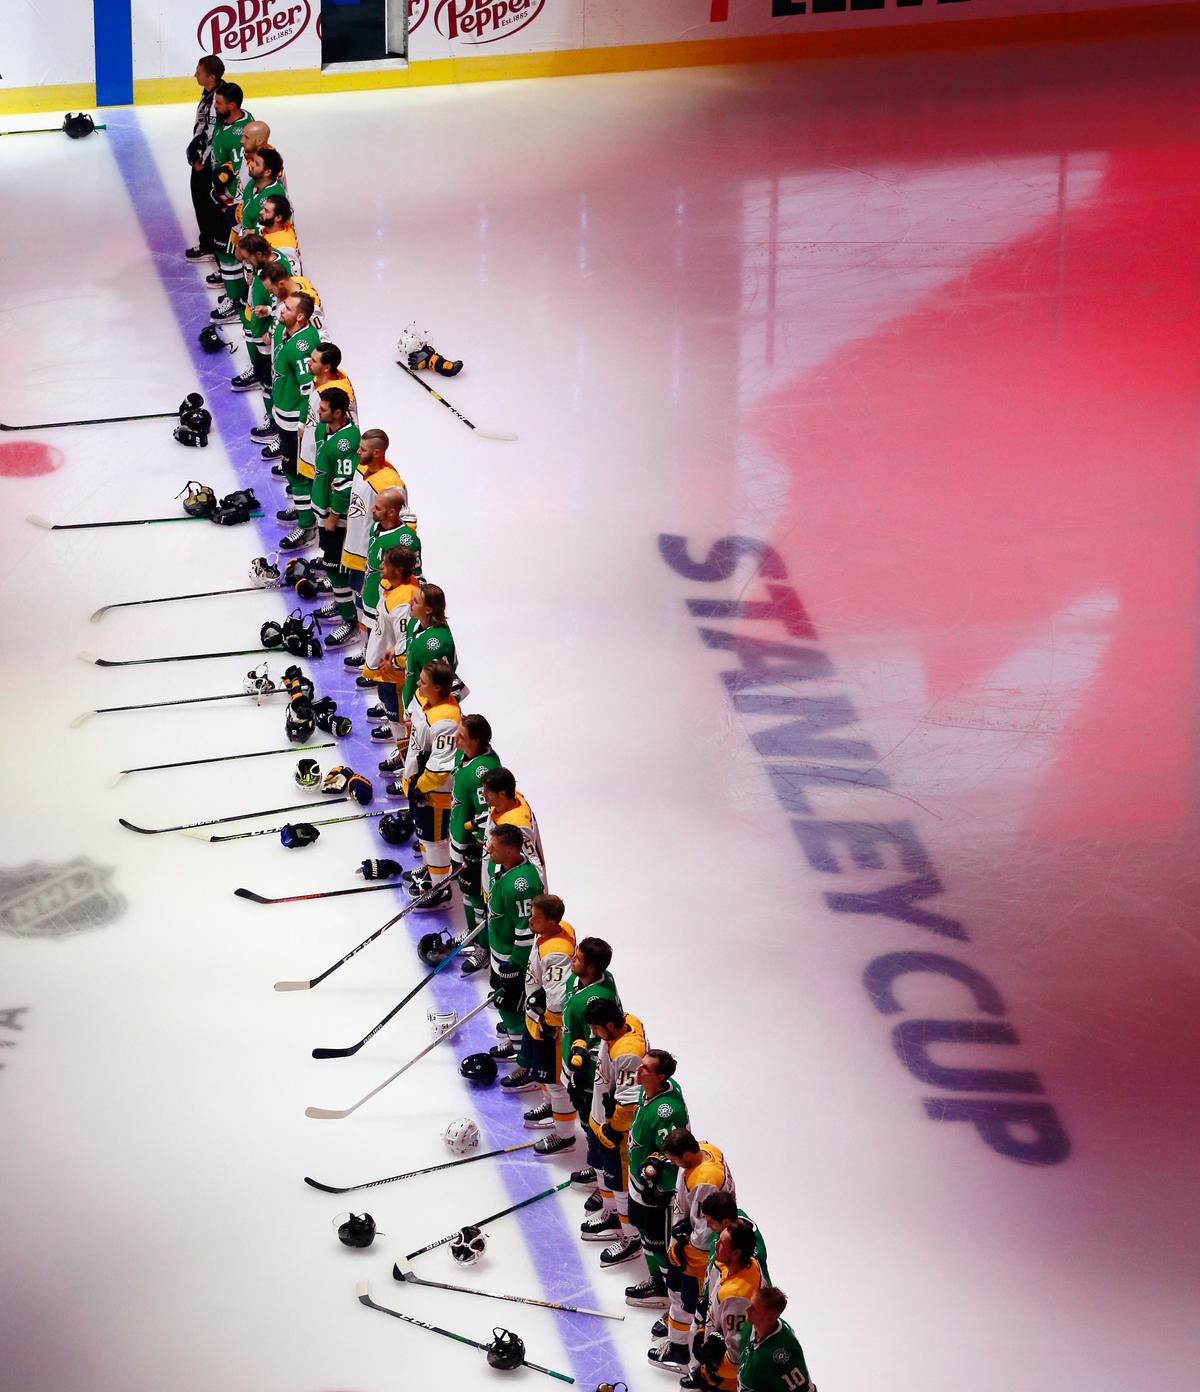 The Dallas Stars and the Nashville Predators stand at attention during the national anthem prior to their exhibition game before the 2020 NHL Stanley Cup Playoffs at Rogers Place on July 30, 2020, in Edmonton, Canada. (Jeff Vinnick/Getty Images)